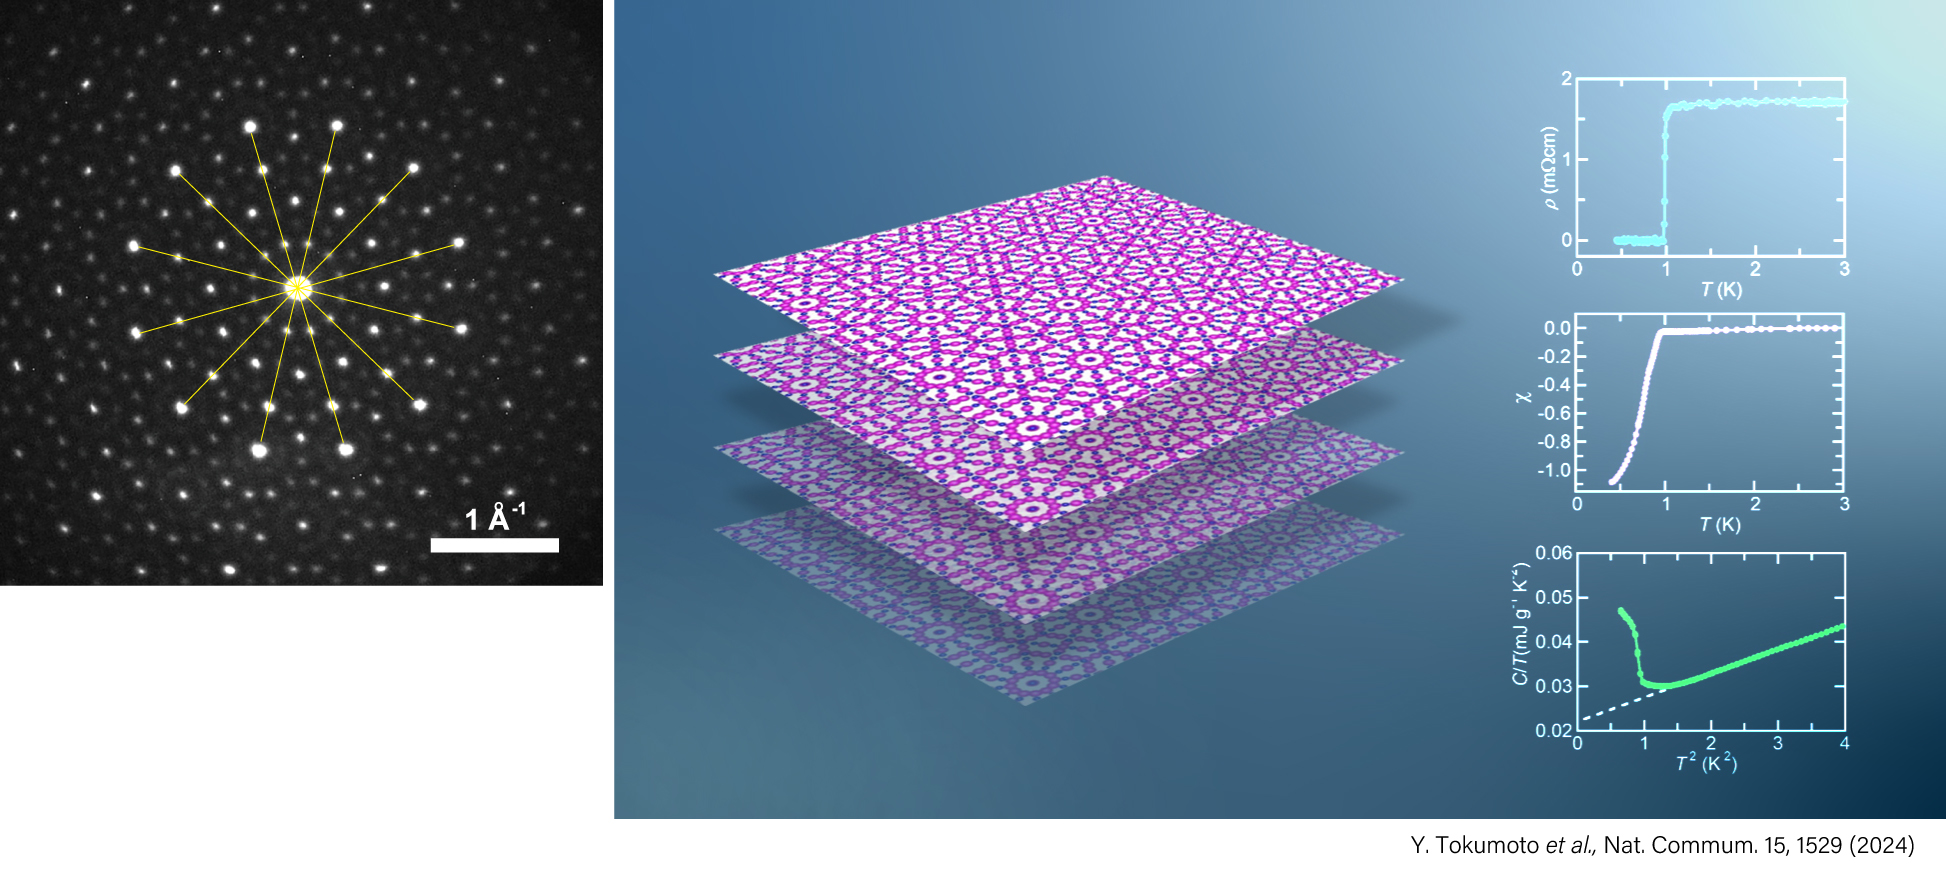 Bulk superconducting transition observed at Tc~1 K. The second example of superconductivity in a quasicrystal, and a first in a thermodynamically stable quasicrystal!!